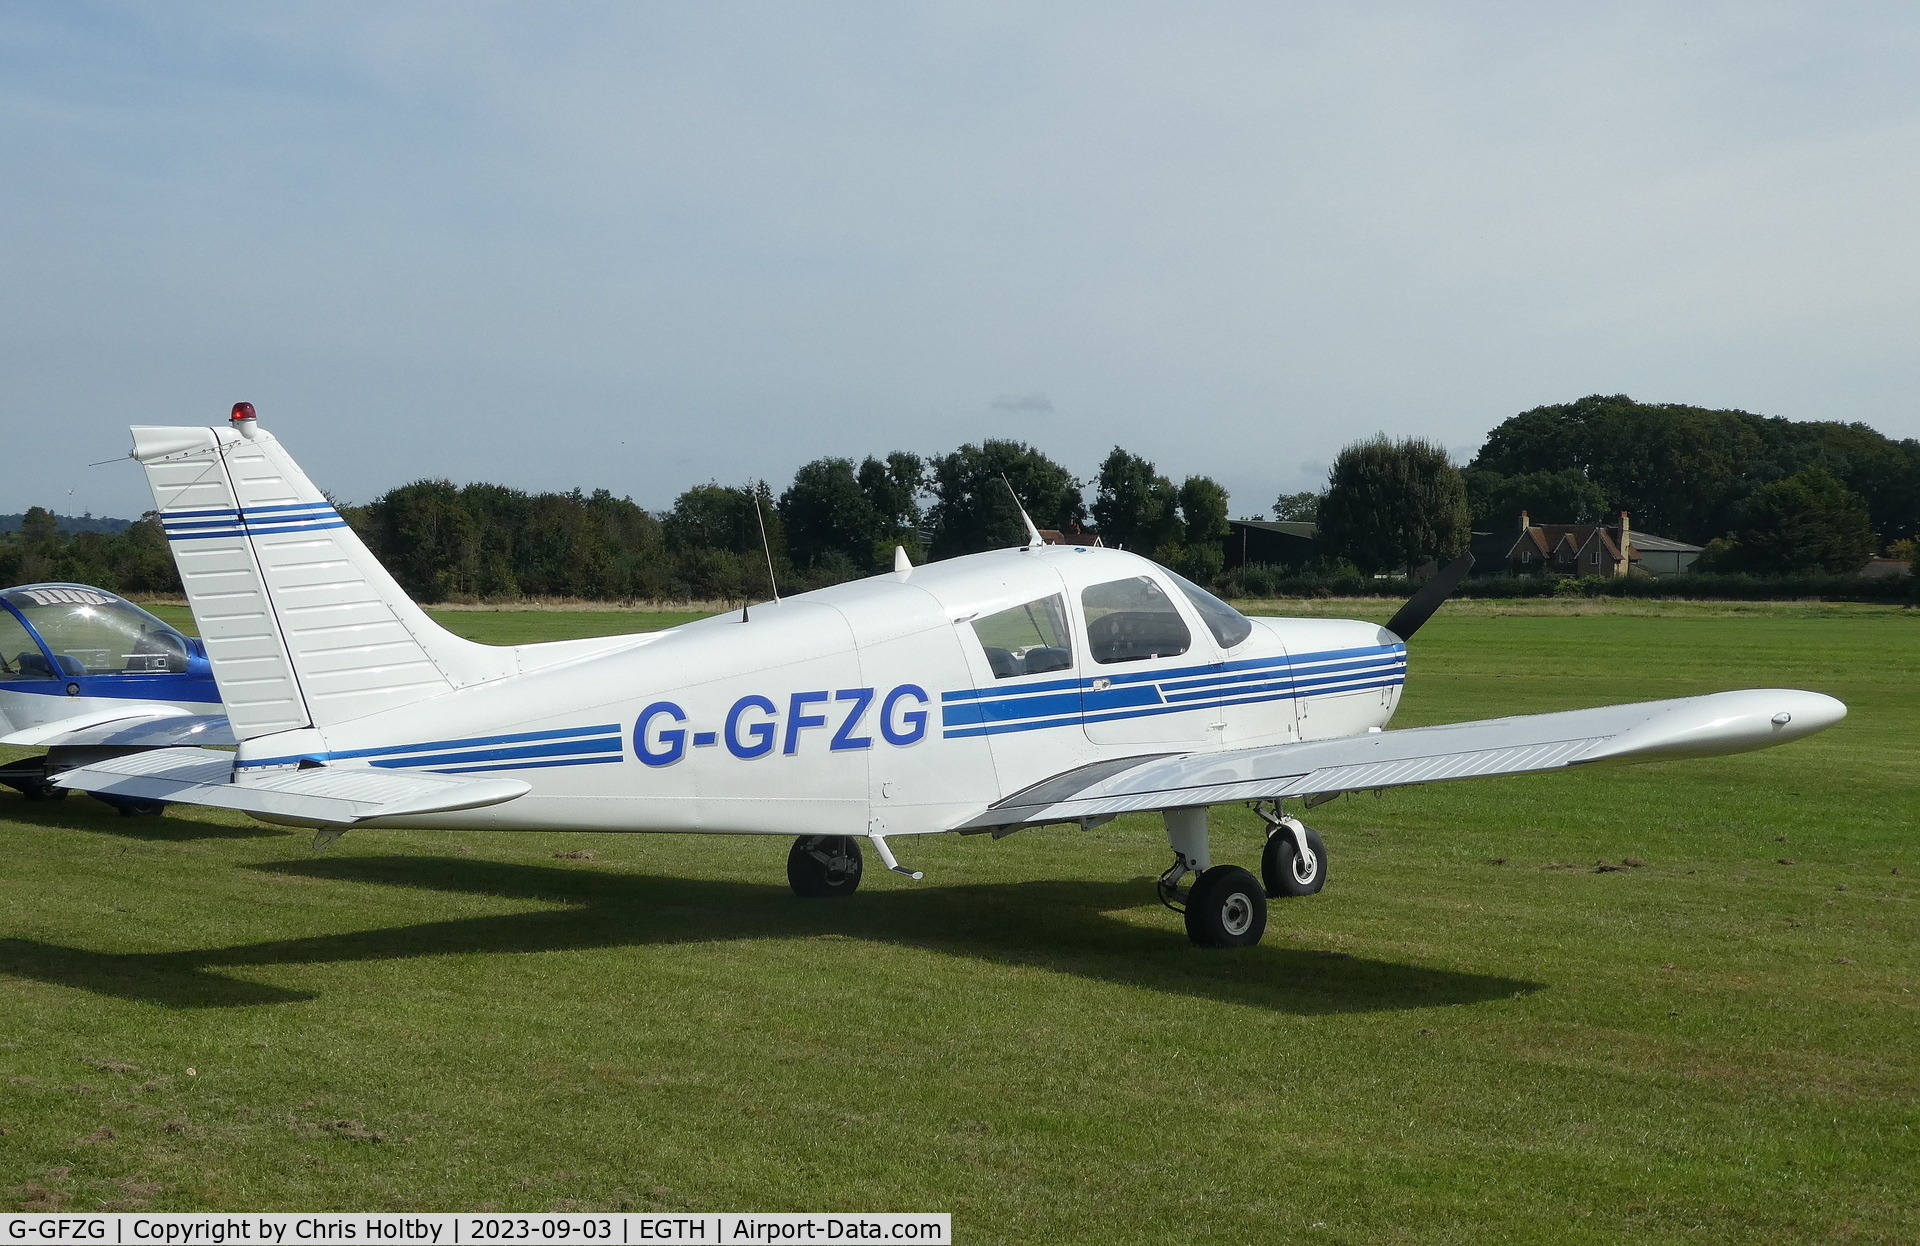 G-GFZG, 1973 Piper PA-28-140 Cherokee C/N 28-7225350, Visiting Old Warden for the Vintage Airshow 2023